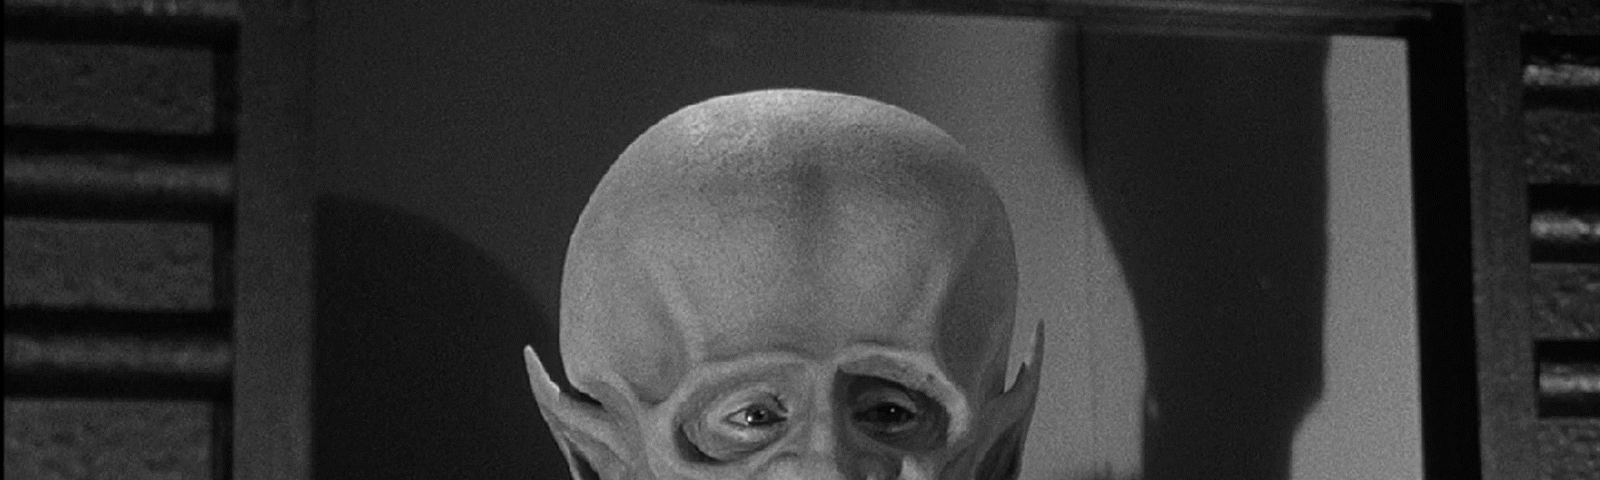 Old photo of a space alien with a huge head